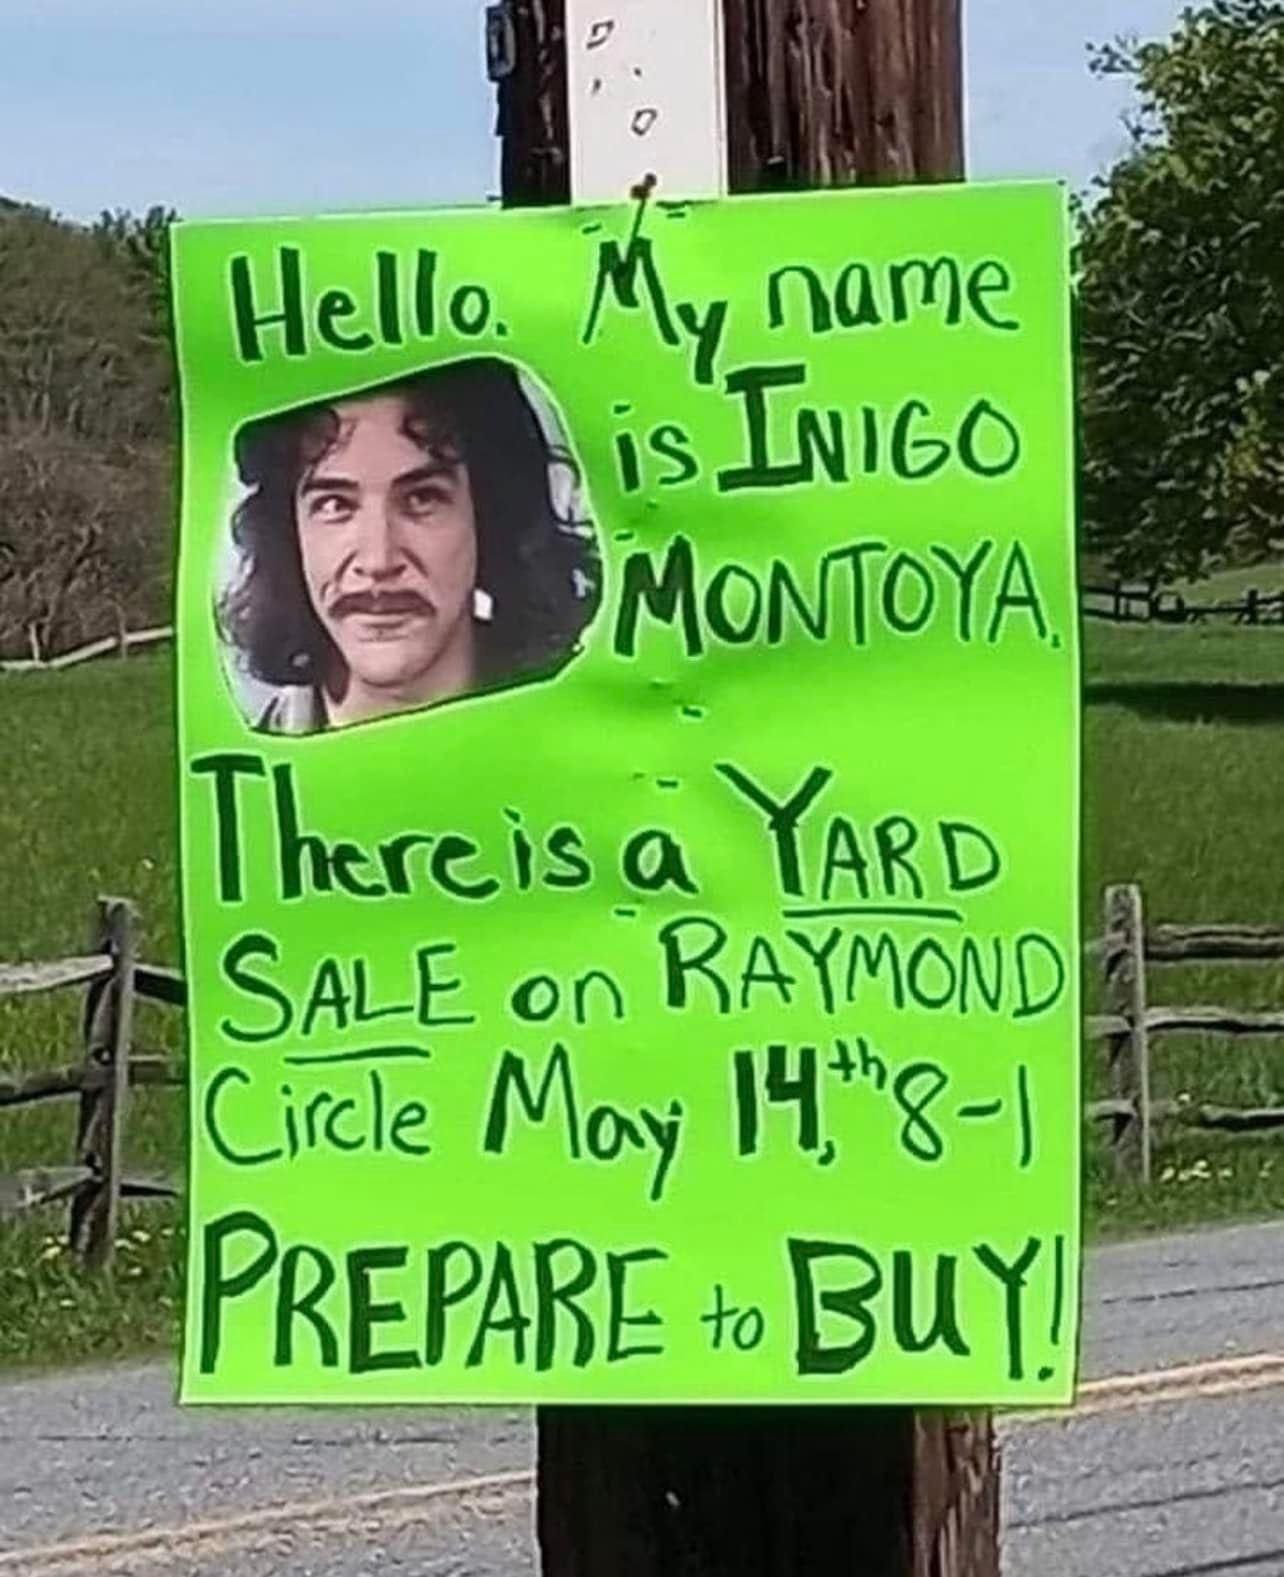 There’s a yard sale!